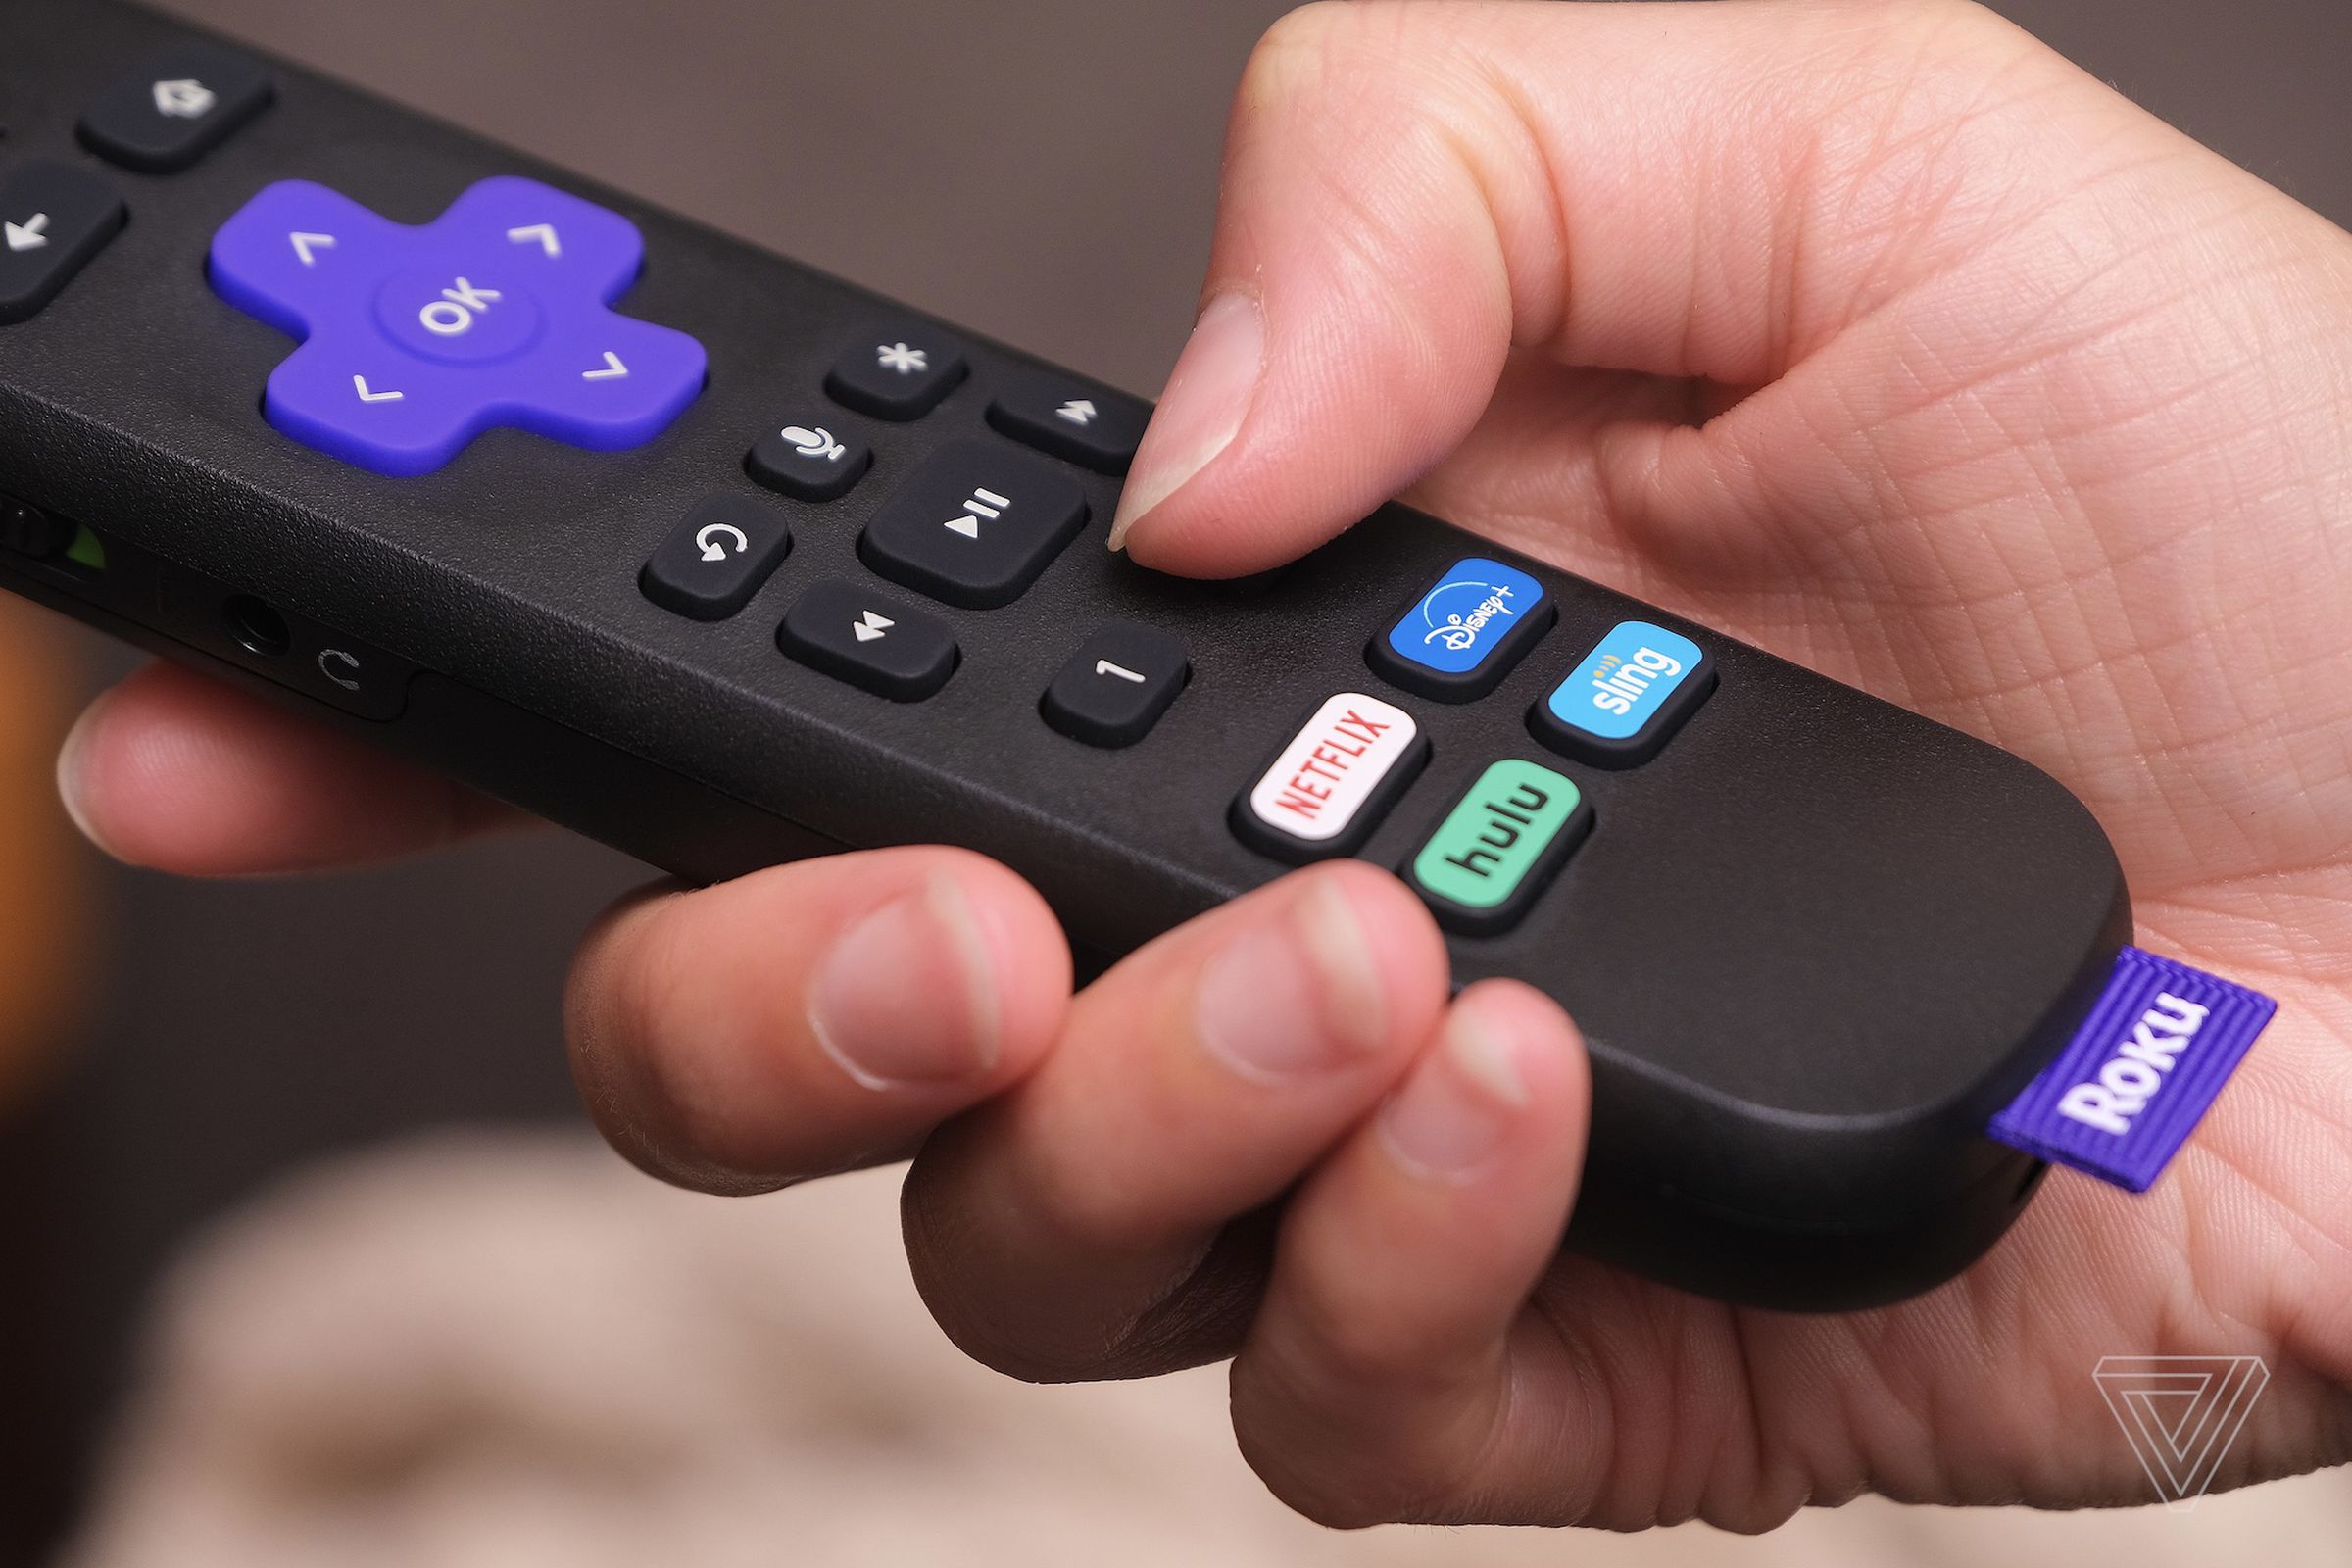 An Apple TV Plus button will eventually replace Sling TV on the Voice Remote Pro.